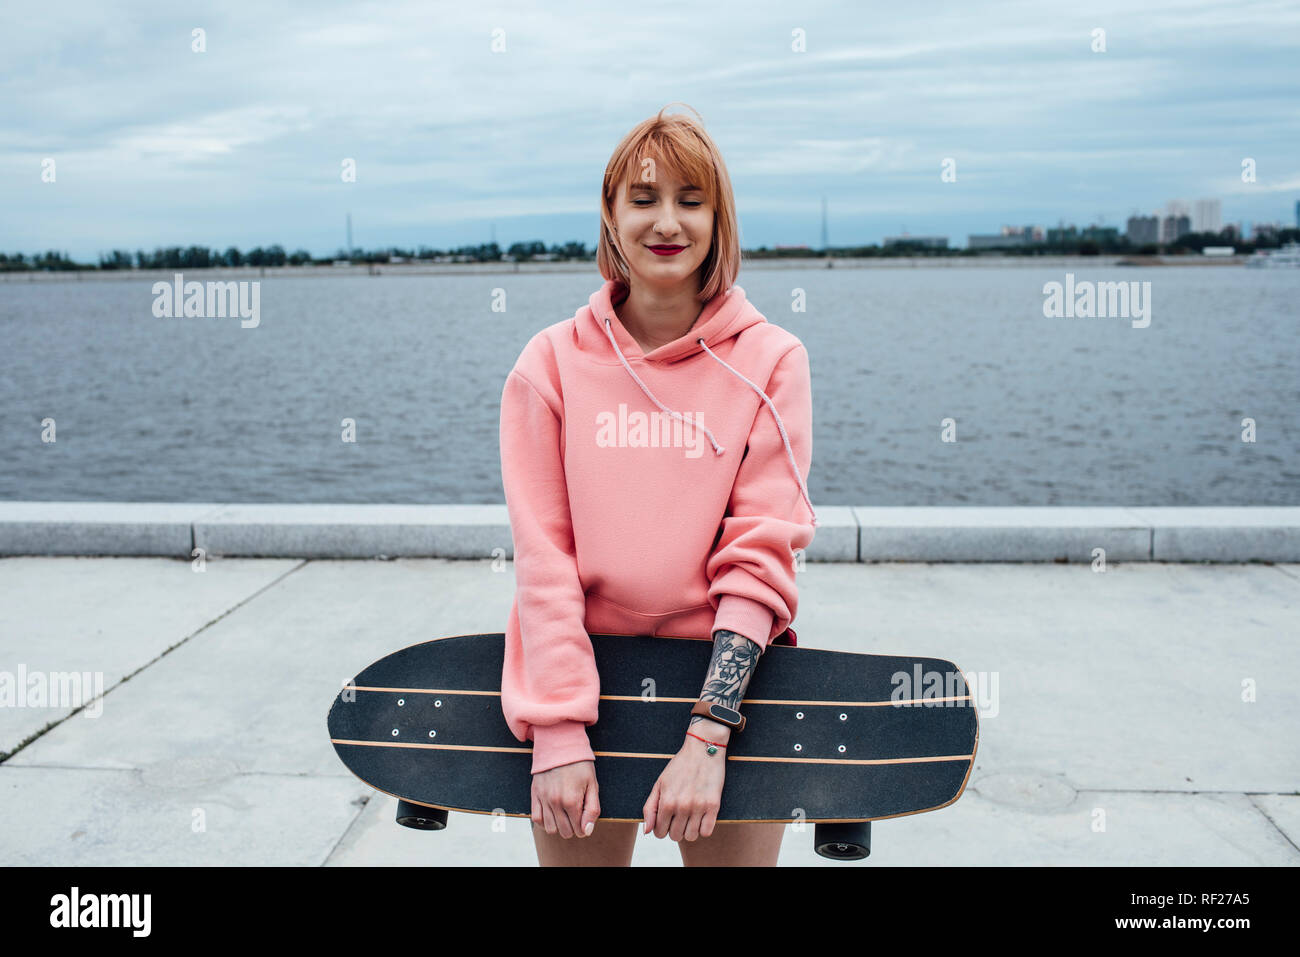 Smiling young woman holding carver skateboard standing at the riverside Stock Photo